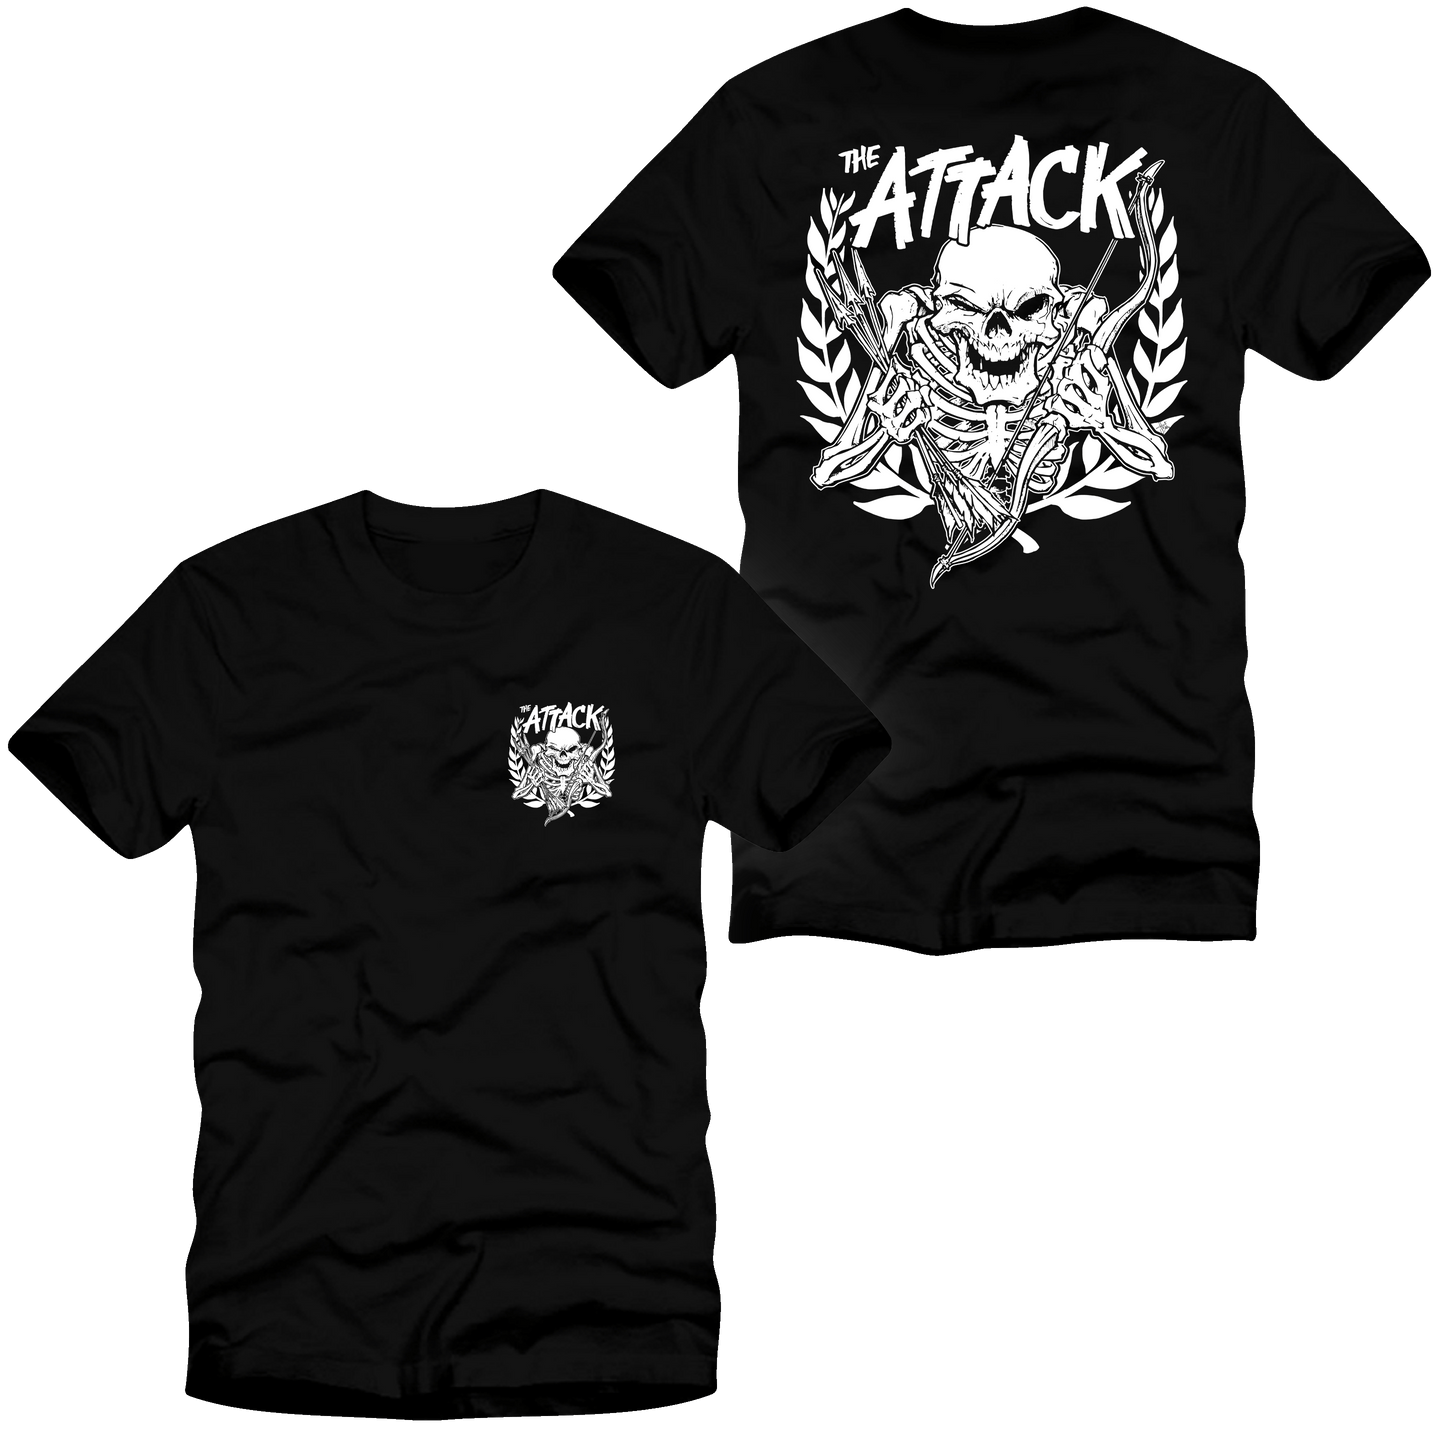 The Attack - Stand By Shirt